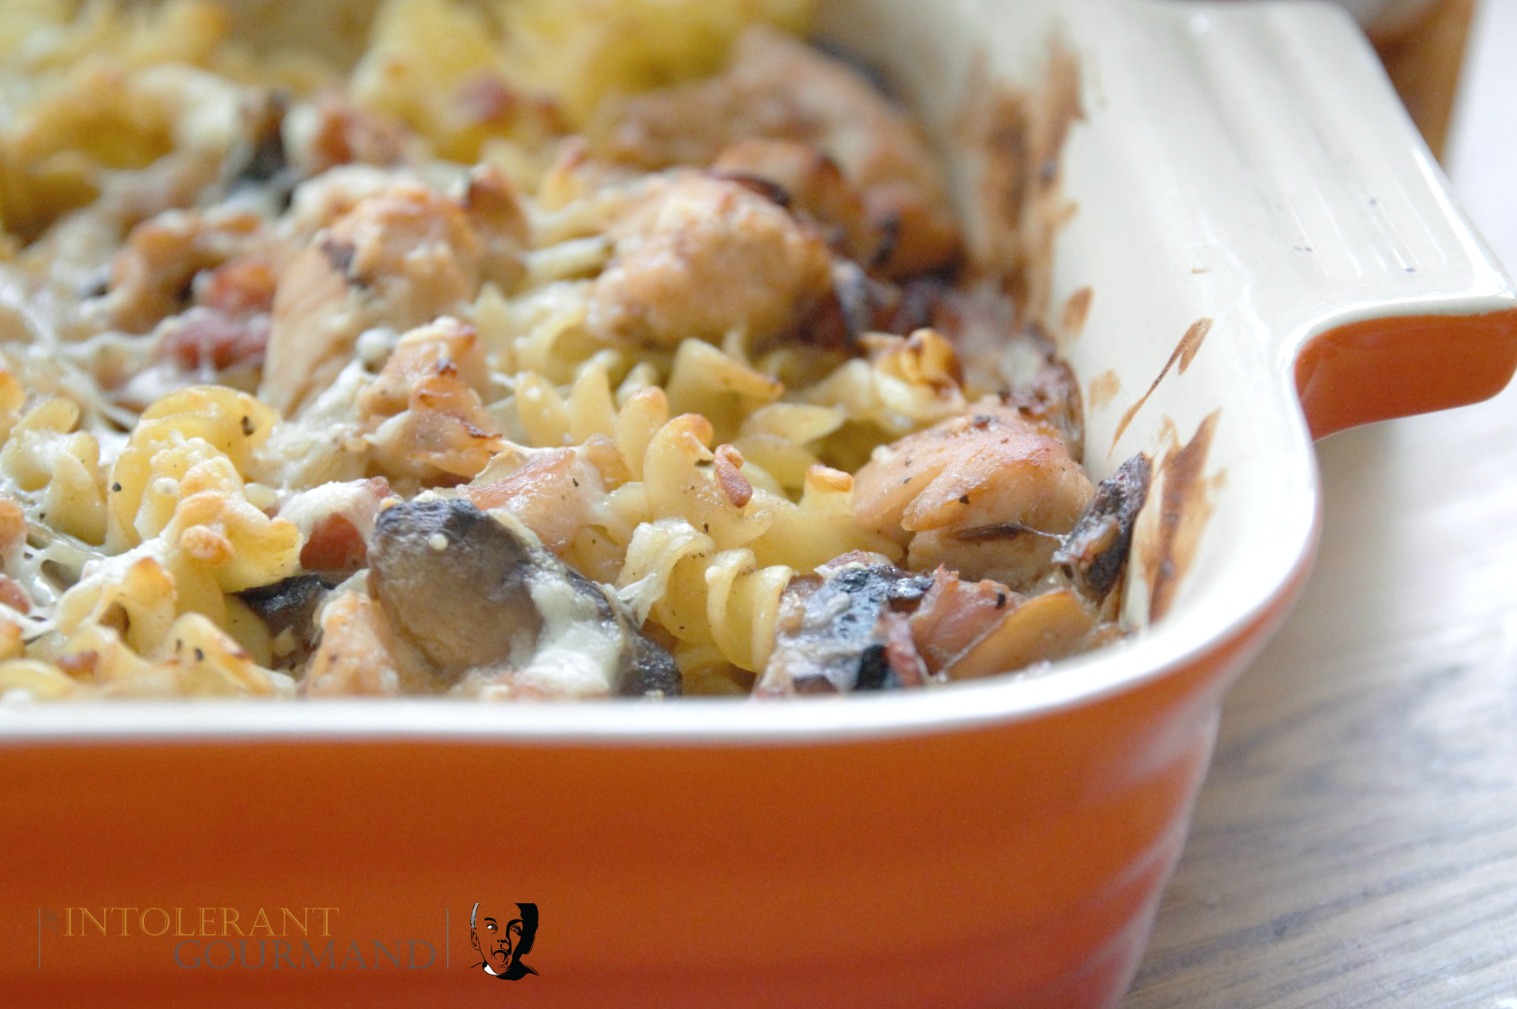 Chicken Mushroom Pasta Bake - made as part of our IBS Awareness Month series. A gluten-free dish, using every day ingredients and packed full of flavour thanks to a2 Milk and Schwartz products! www.intolerantgourmand.com